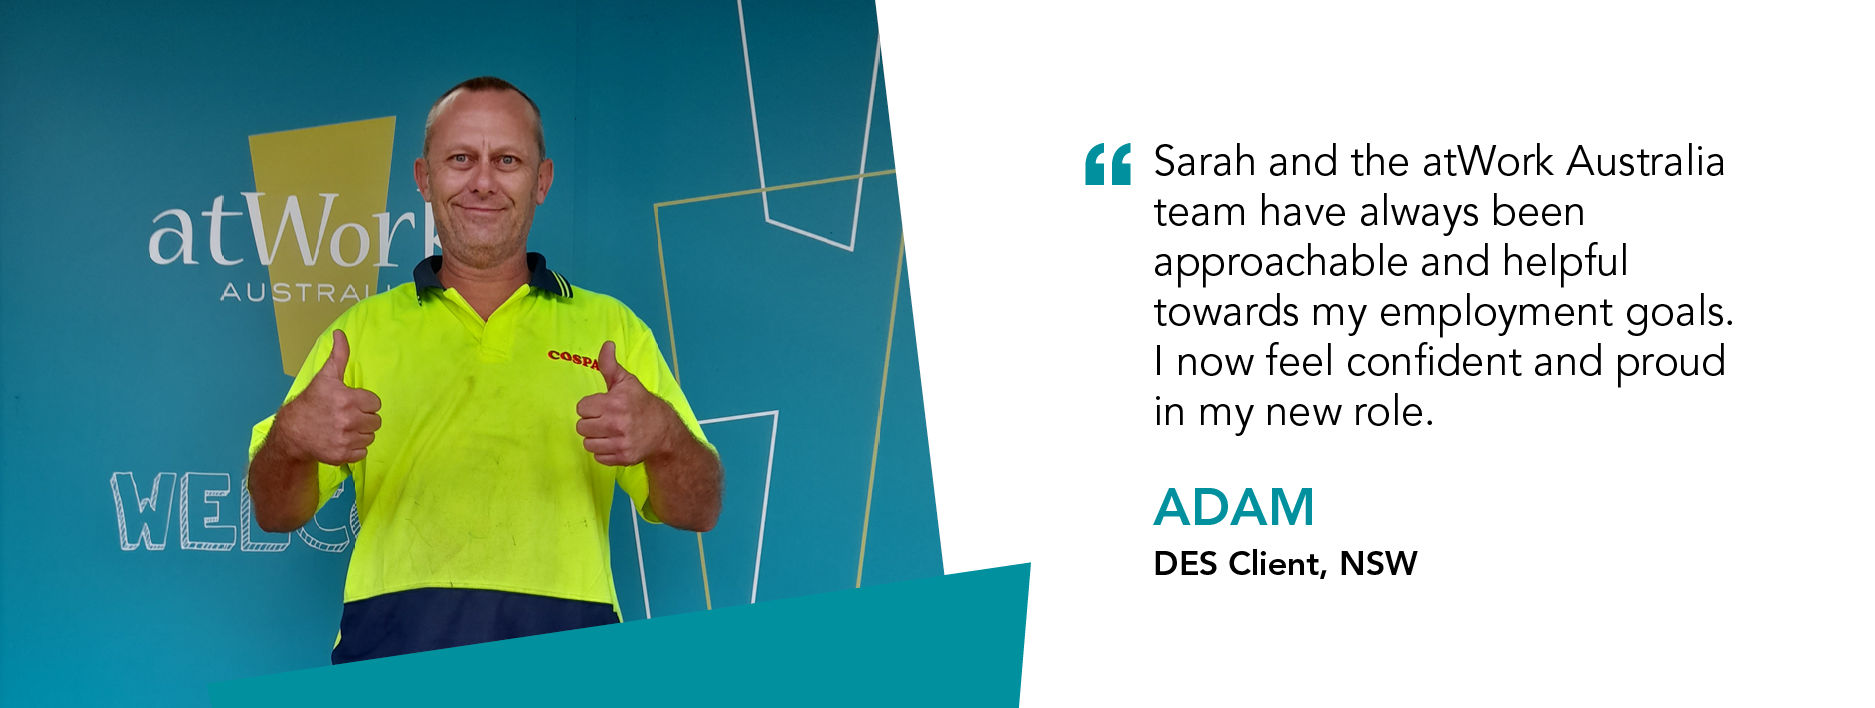 “Sarah and the atWork Australia team have always been approachable and helpful towards my employment goals. I now feel confident and proud in my new role.” Adam, DES Client, NSW